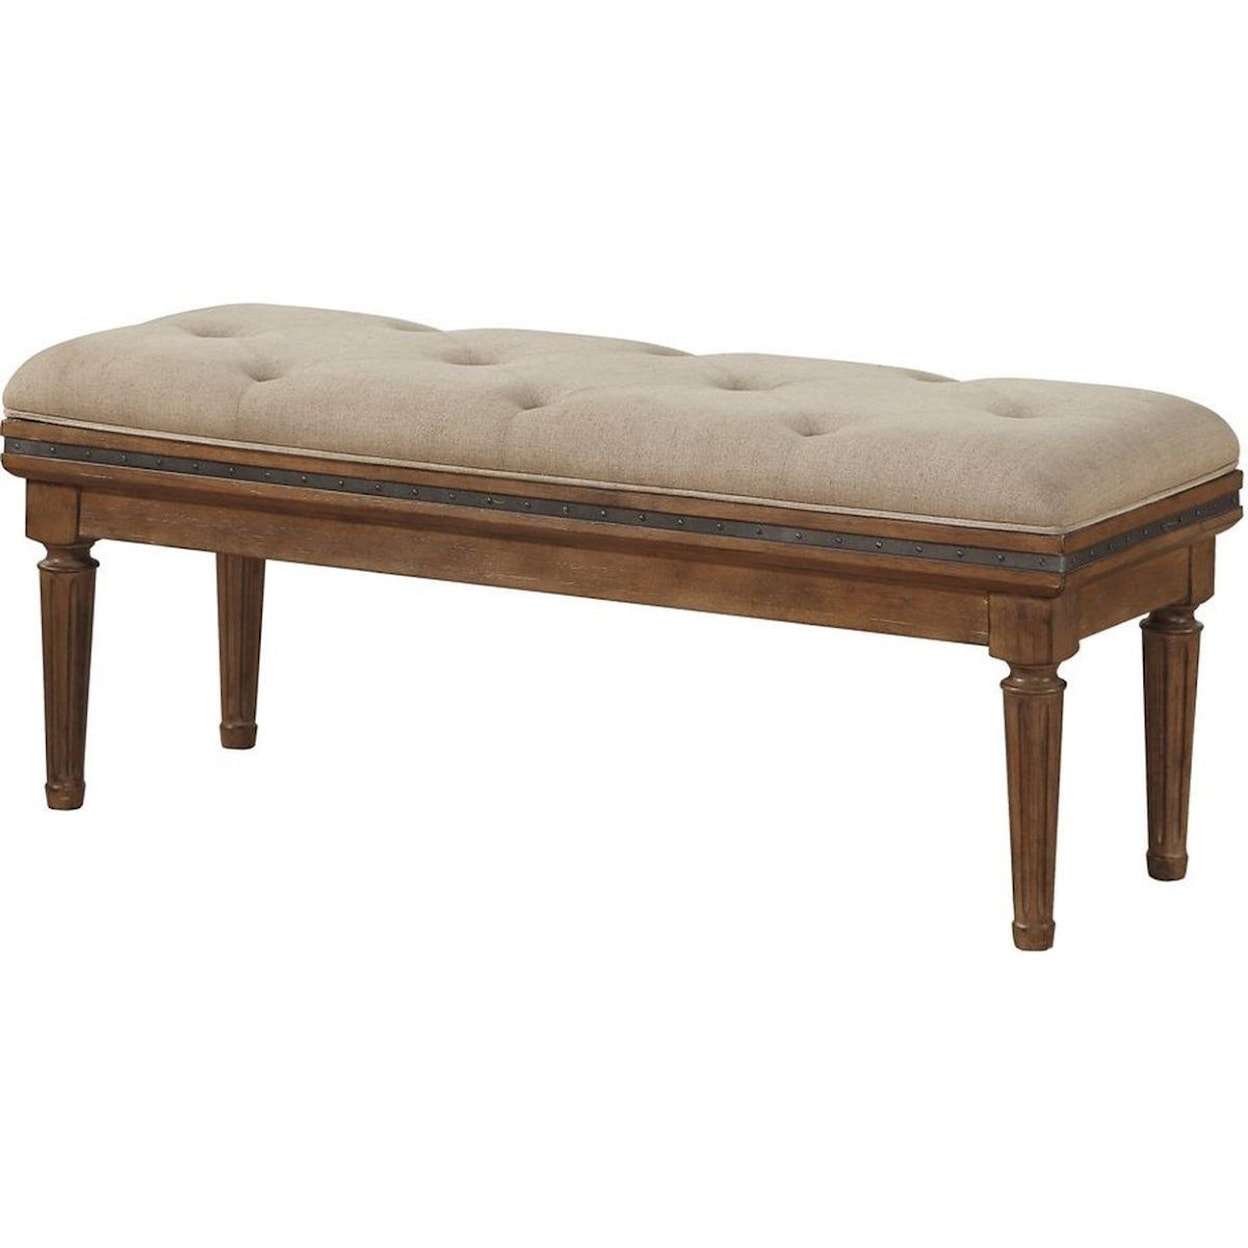 Avalon Furniture Ascot Bed Bench